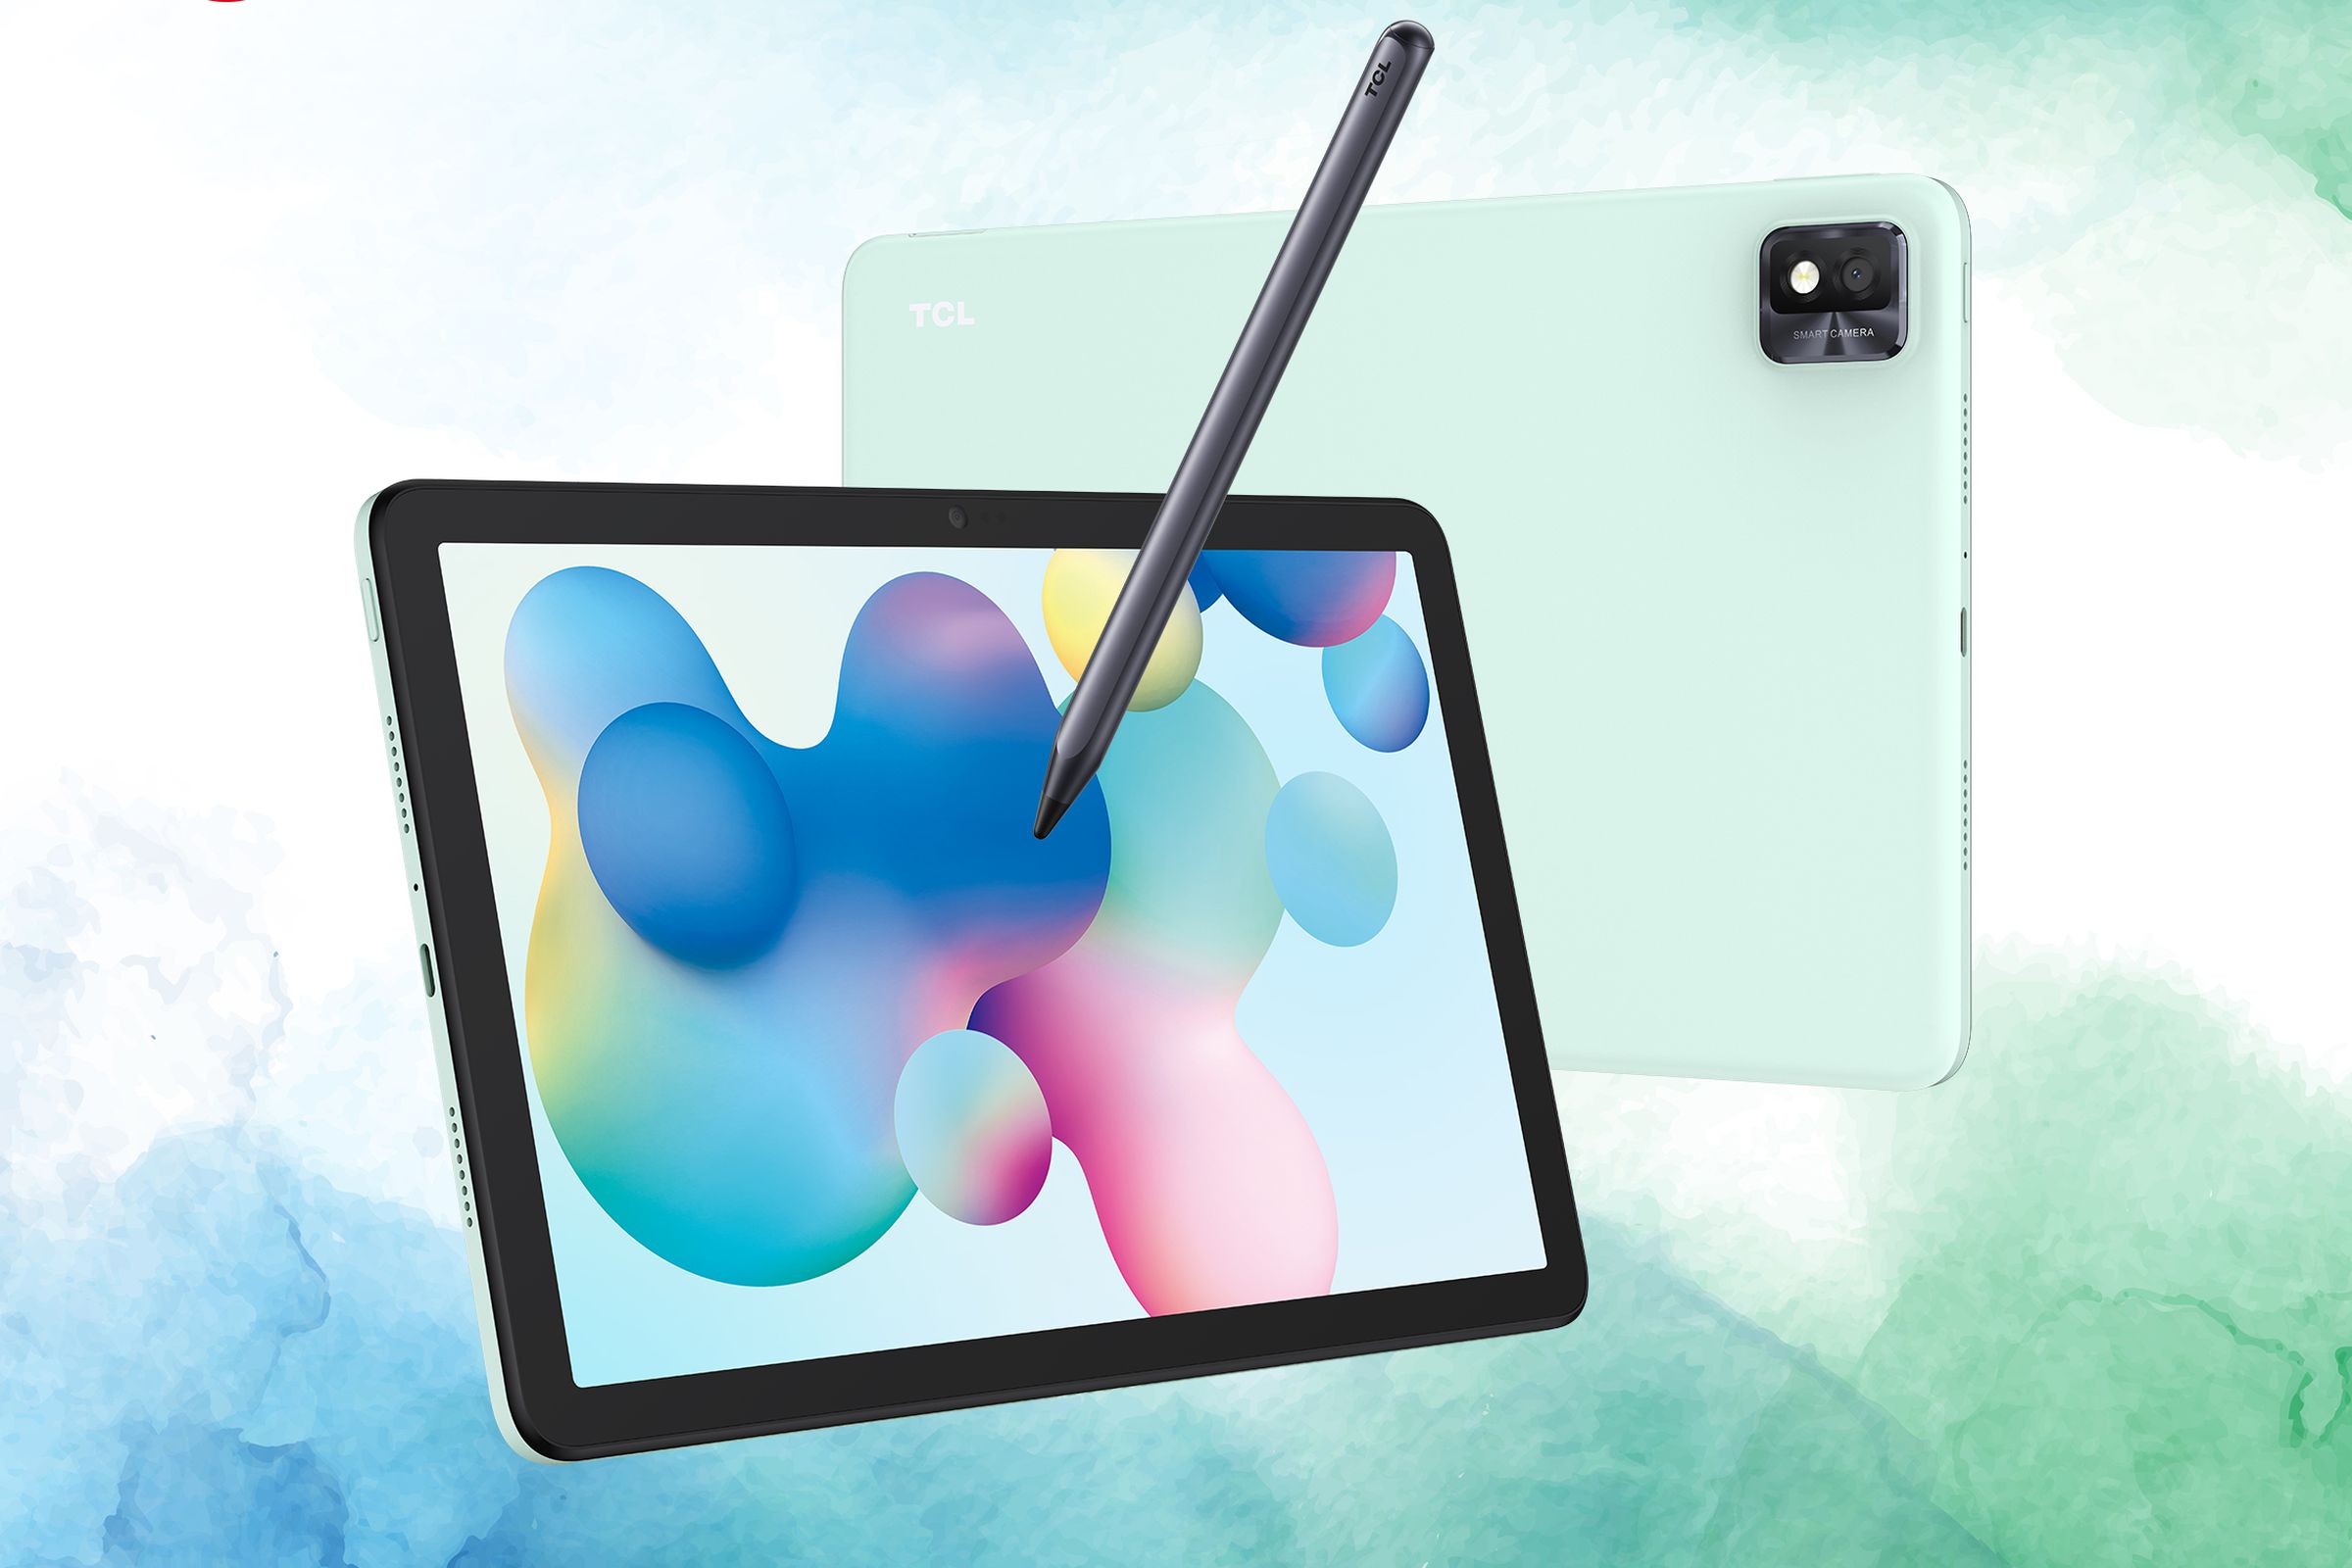 The TCL Nxtpaper 10S tablet reduces blue light by 10 percent.